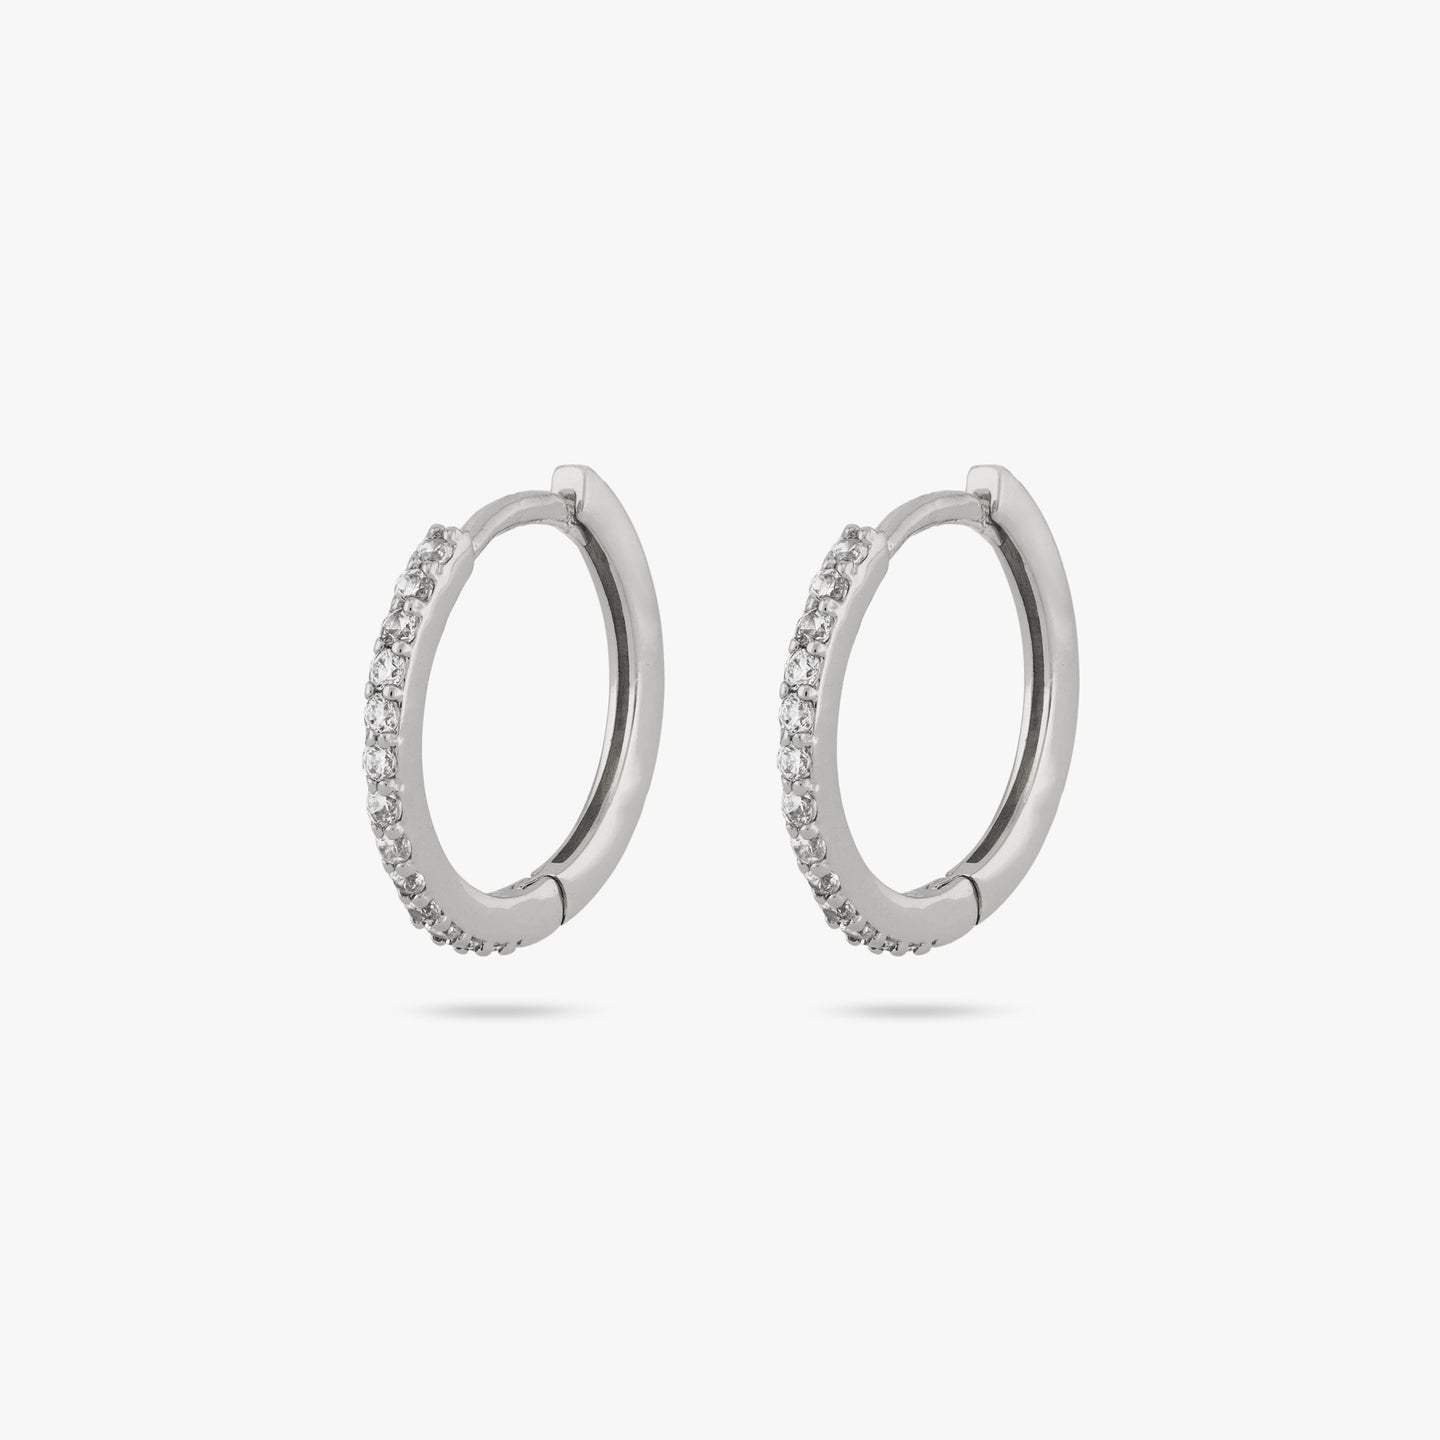 This is a pair of small silver hoops with clear cz gems along the front of them [pair] color:null|silver/clear